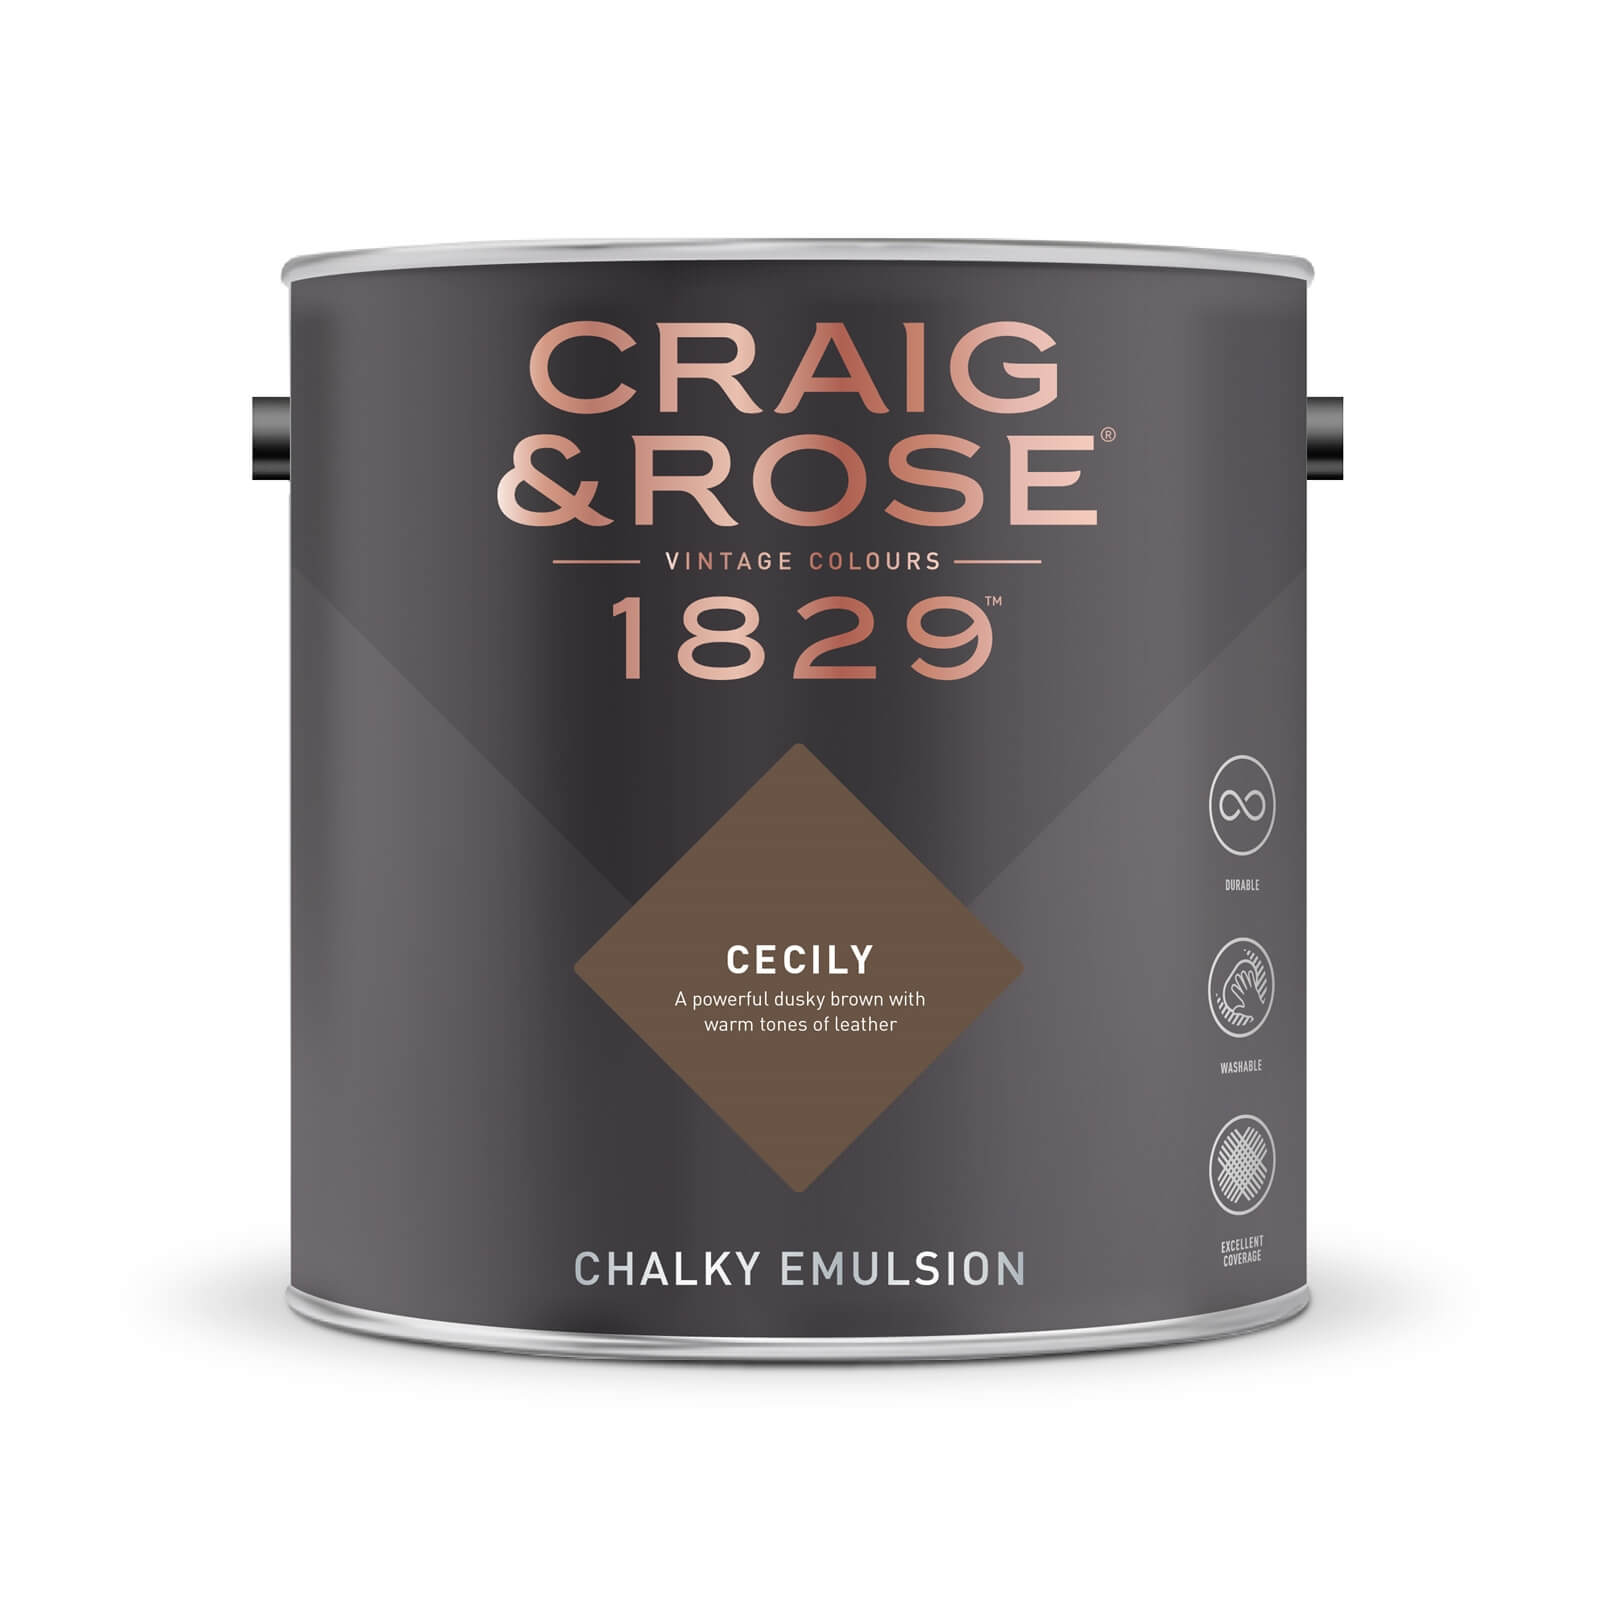 Craig & Rose 1829 Chalky Emulsion Paint Cecily - 750ml